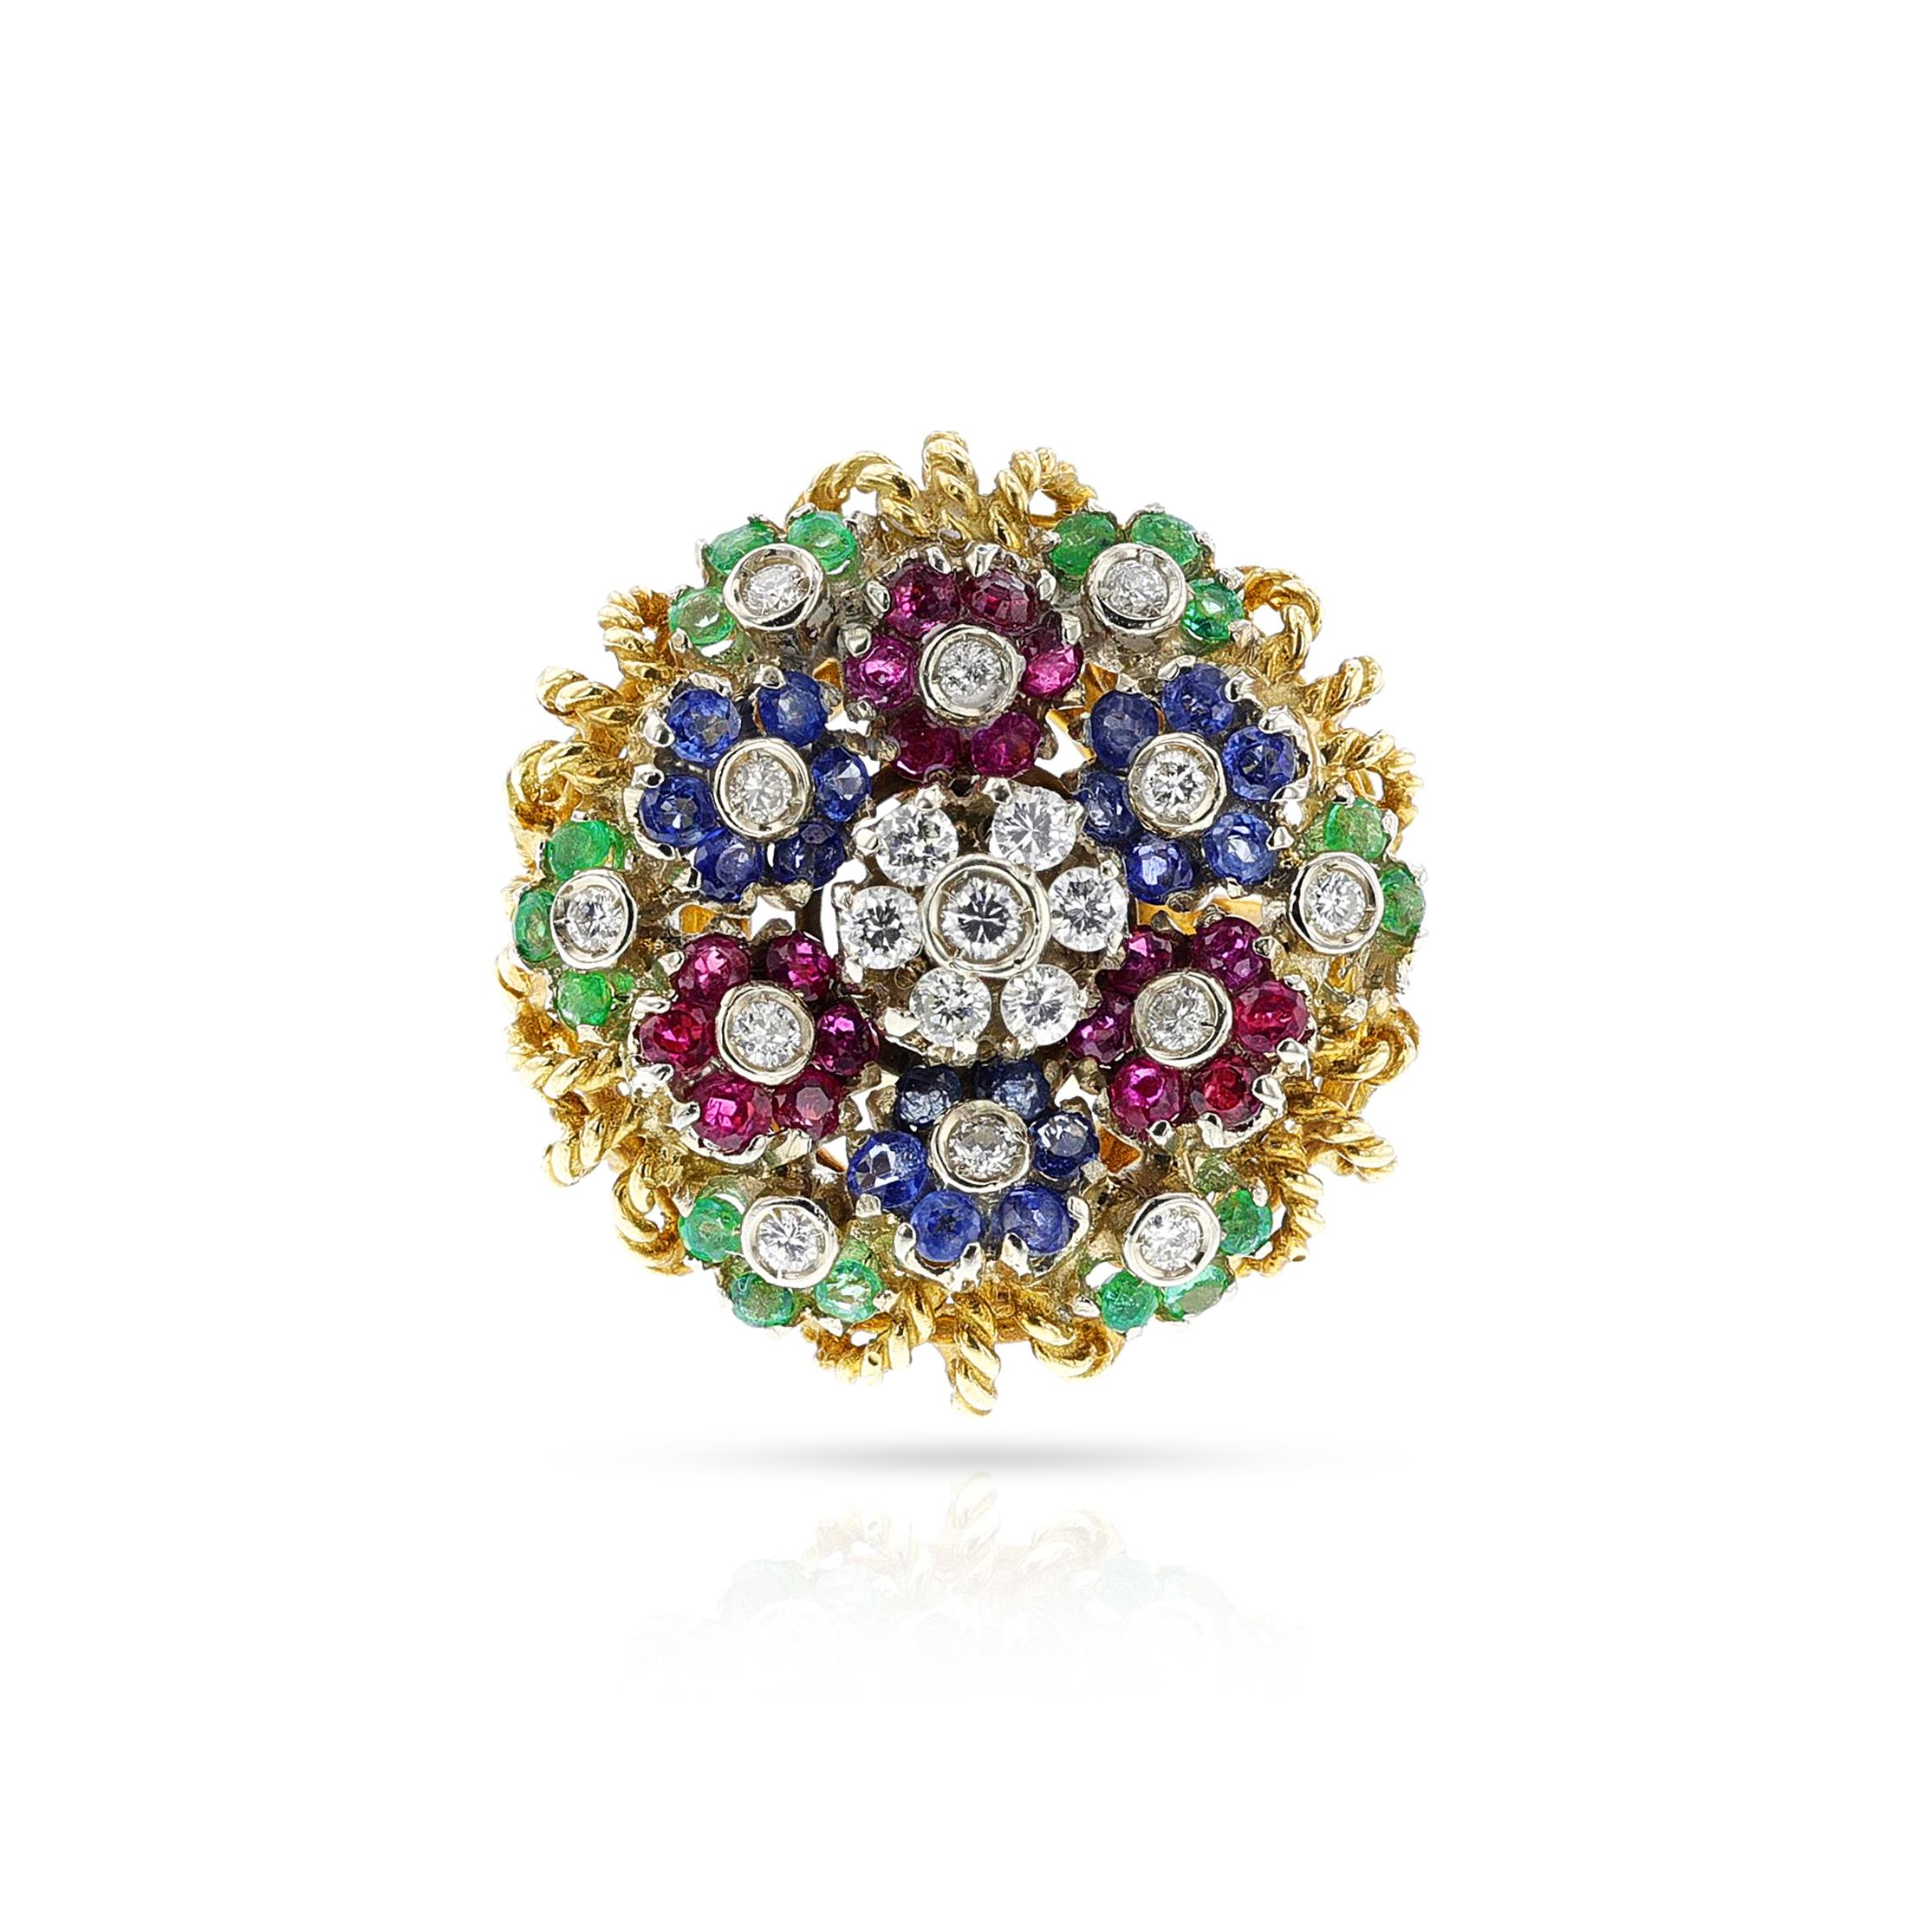 A Ruby, Emerald, Sapphire and Diamond Floral Ring made in 18k Yellow Gold. The ring size is US 7. 
The weights of the stone are approximately: Sapphire: 0.90 cts, Ruby, 0.90 cts. Emerald: 0.72 cts., Diamond 0.57 cts.

1398-ACJATR